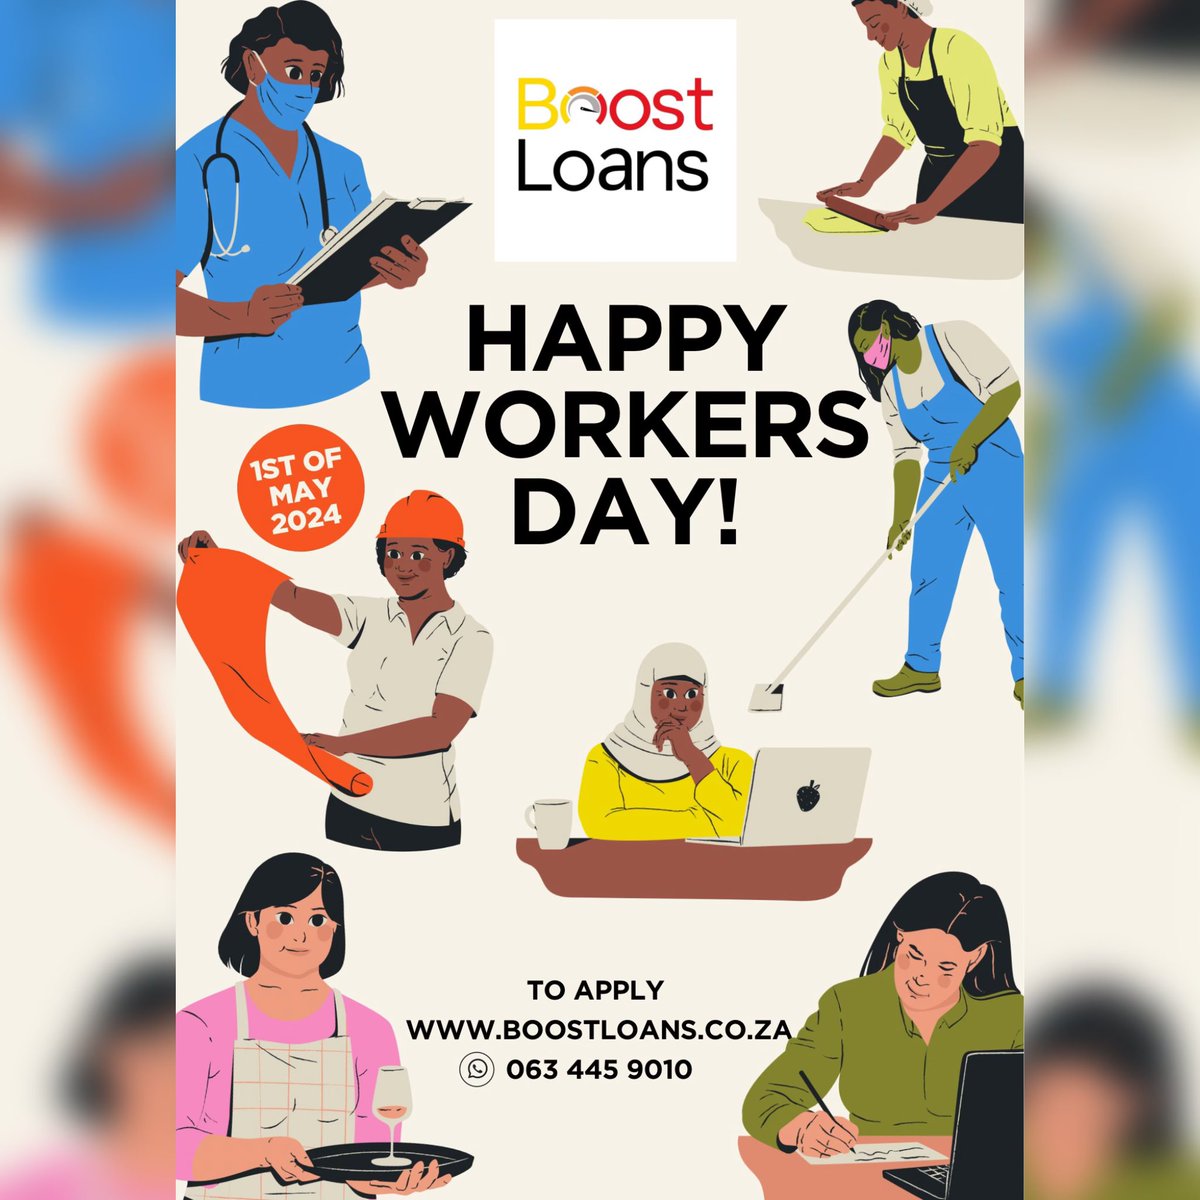 Take a moment to appreciate your accomplishments and recharge for new challenges. 😅

#happyworkersday #relaxday #boostloans